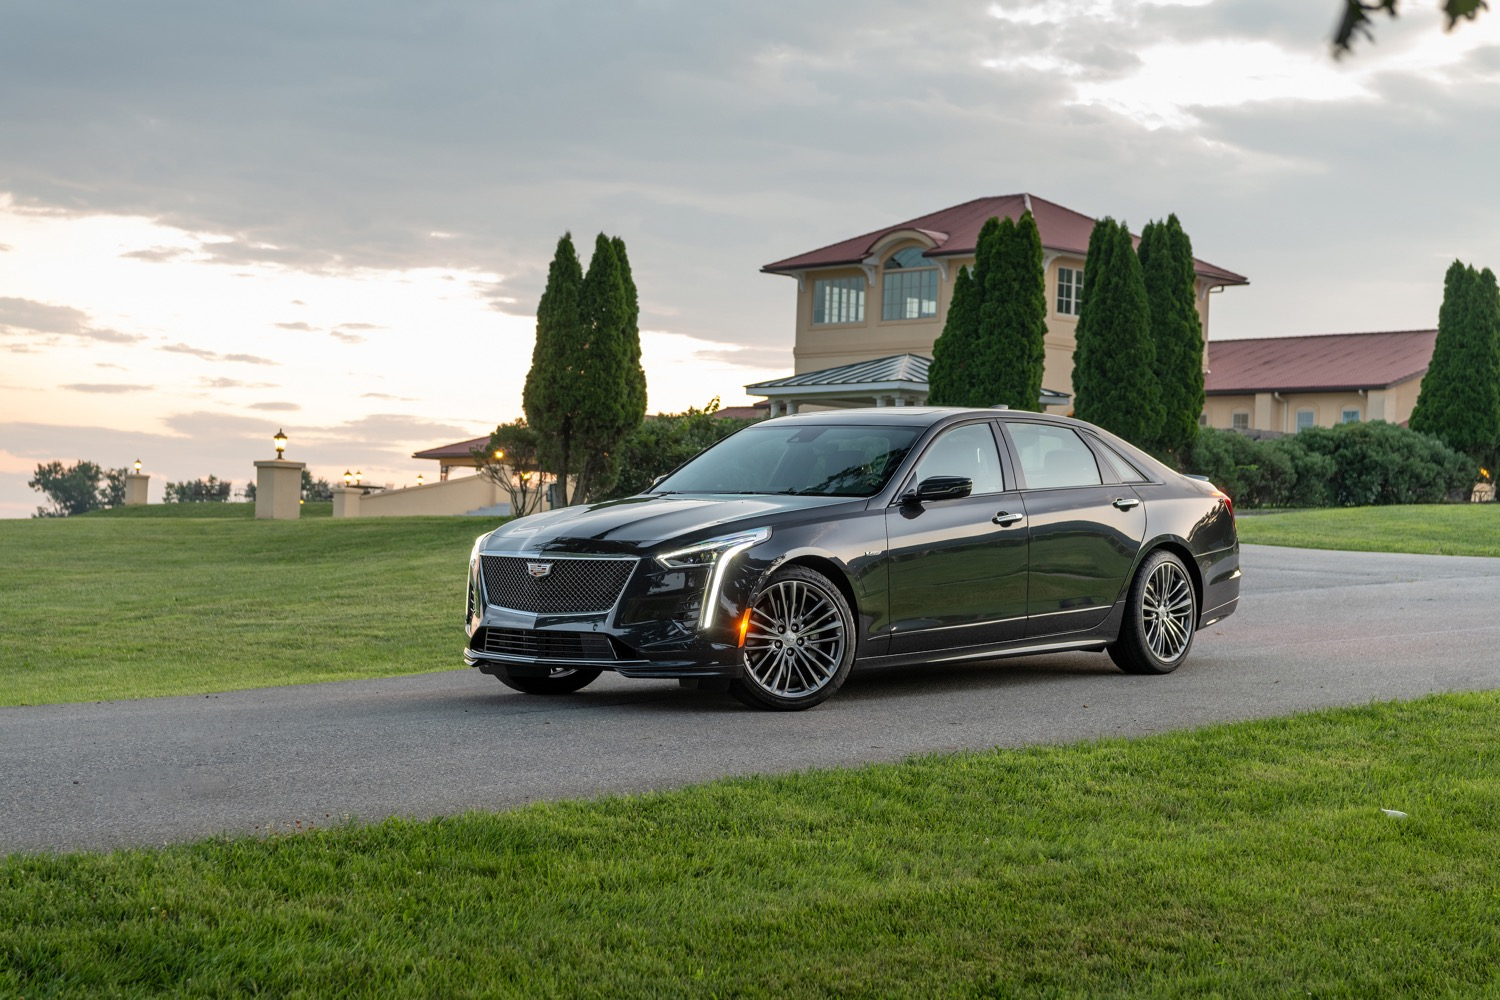 New 2022 Cadillac Ct6 Sport V8, Lease, Build And Price Cadillac Specs